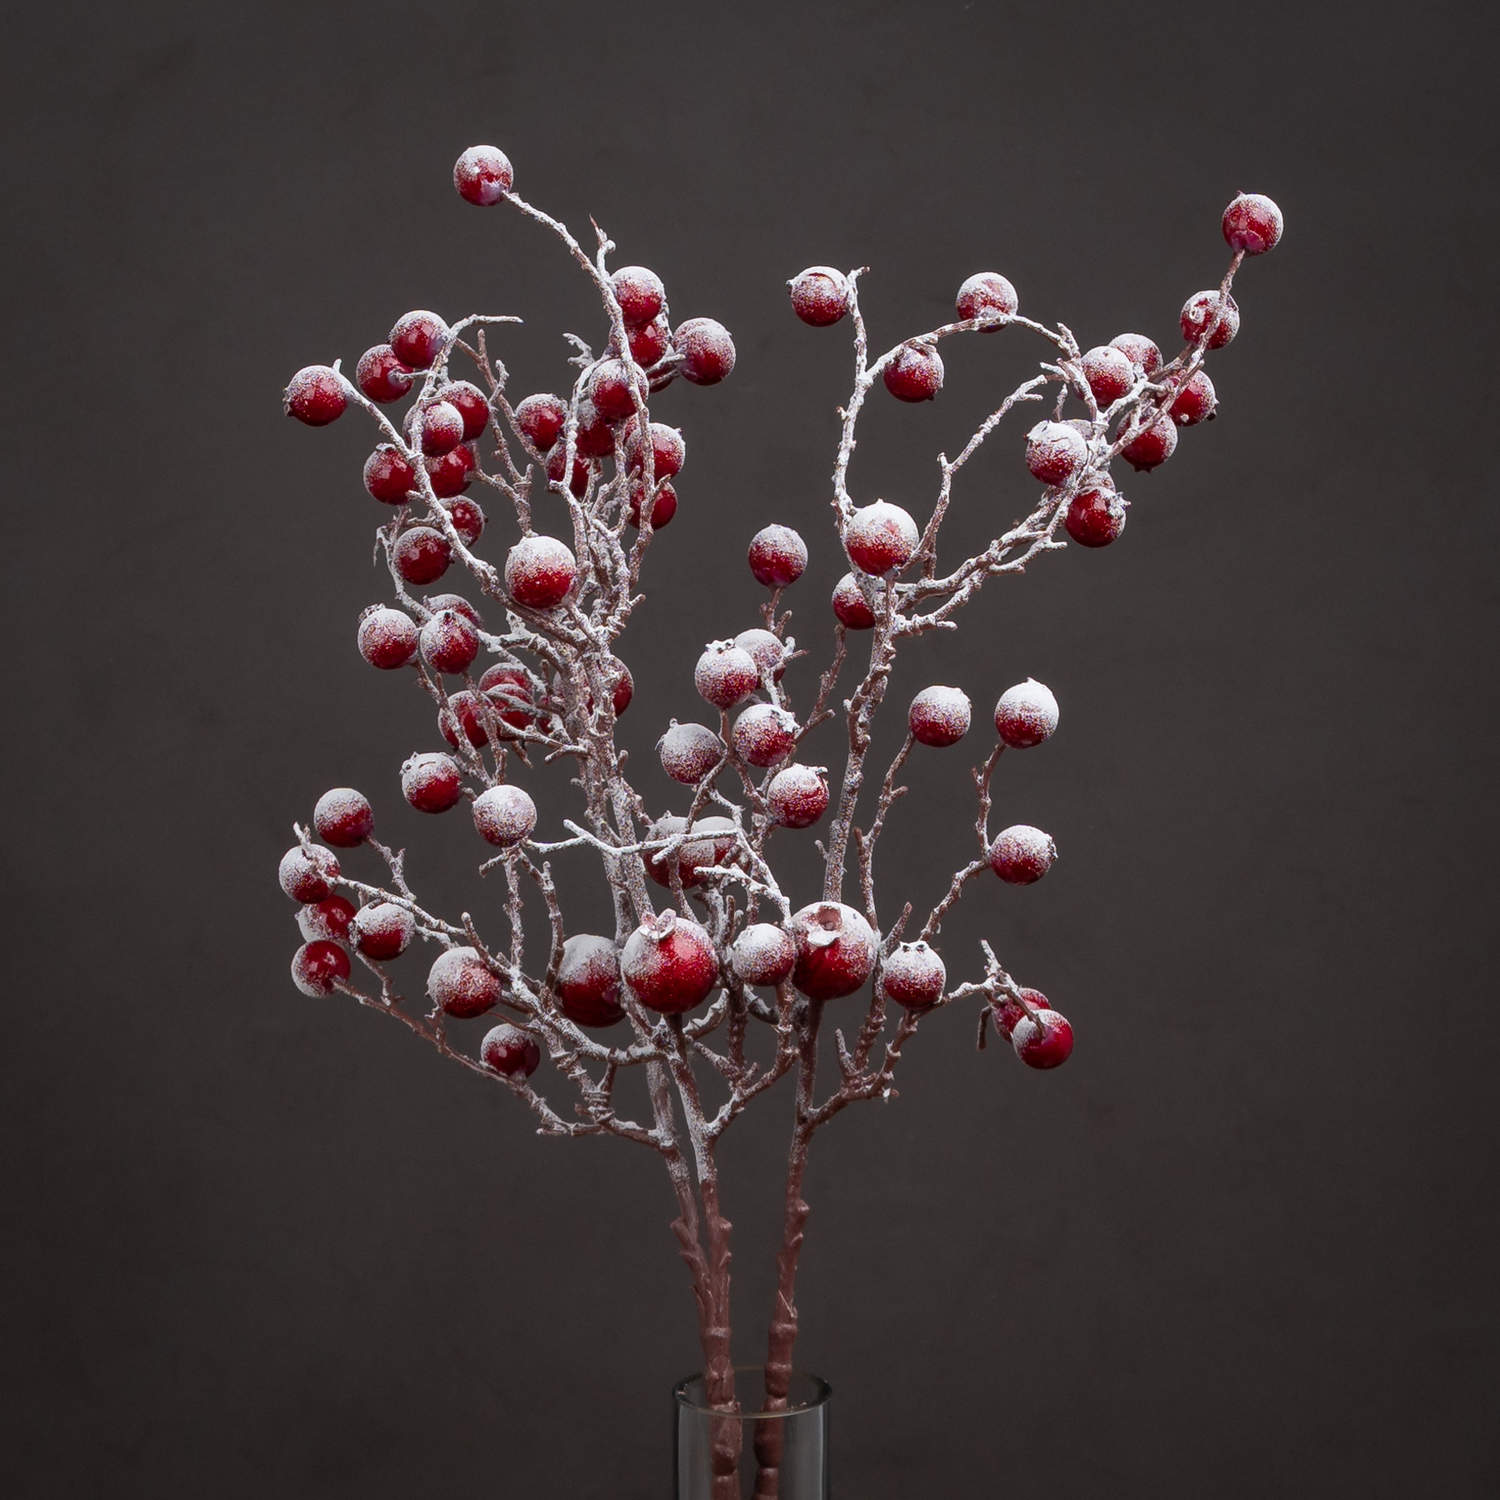 Large Red Festive Berry - Image 1